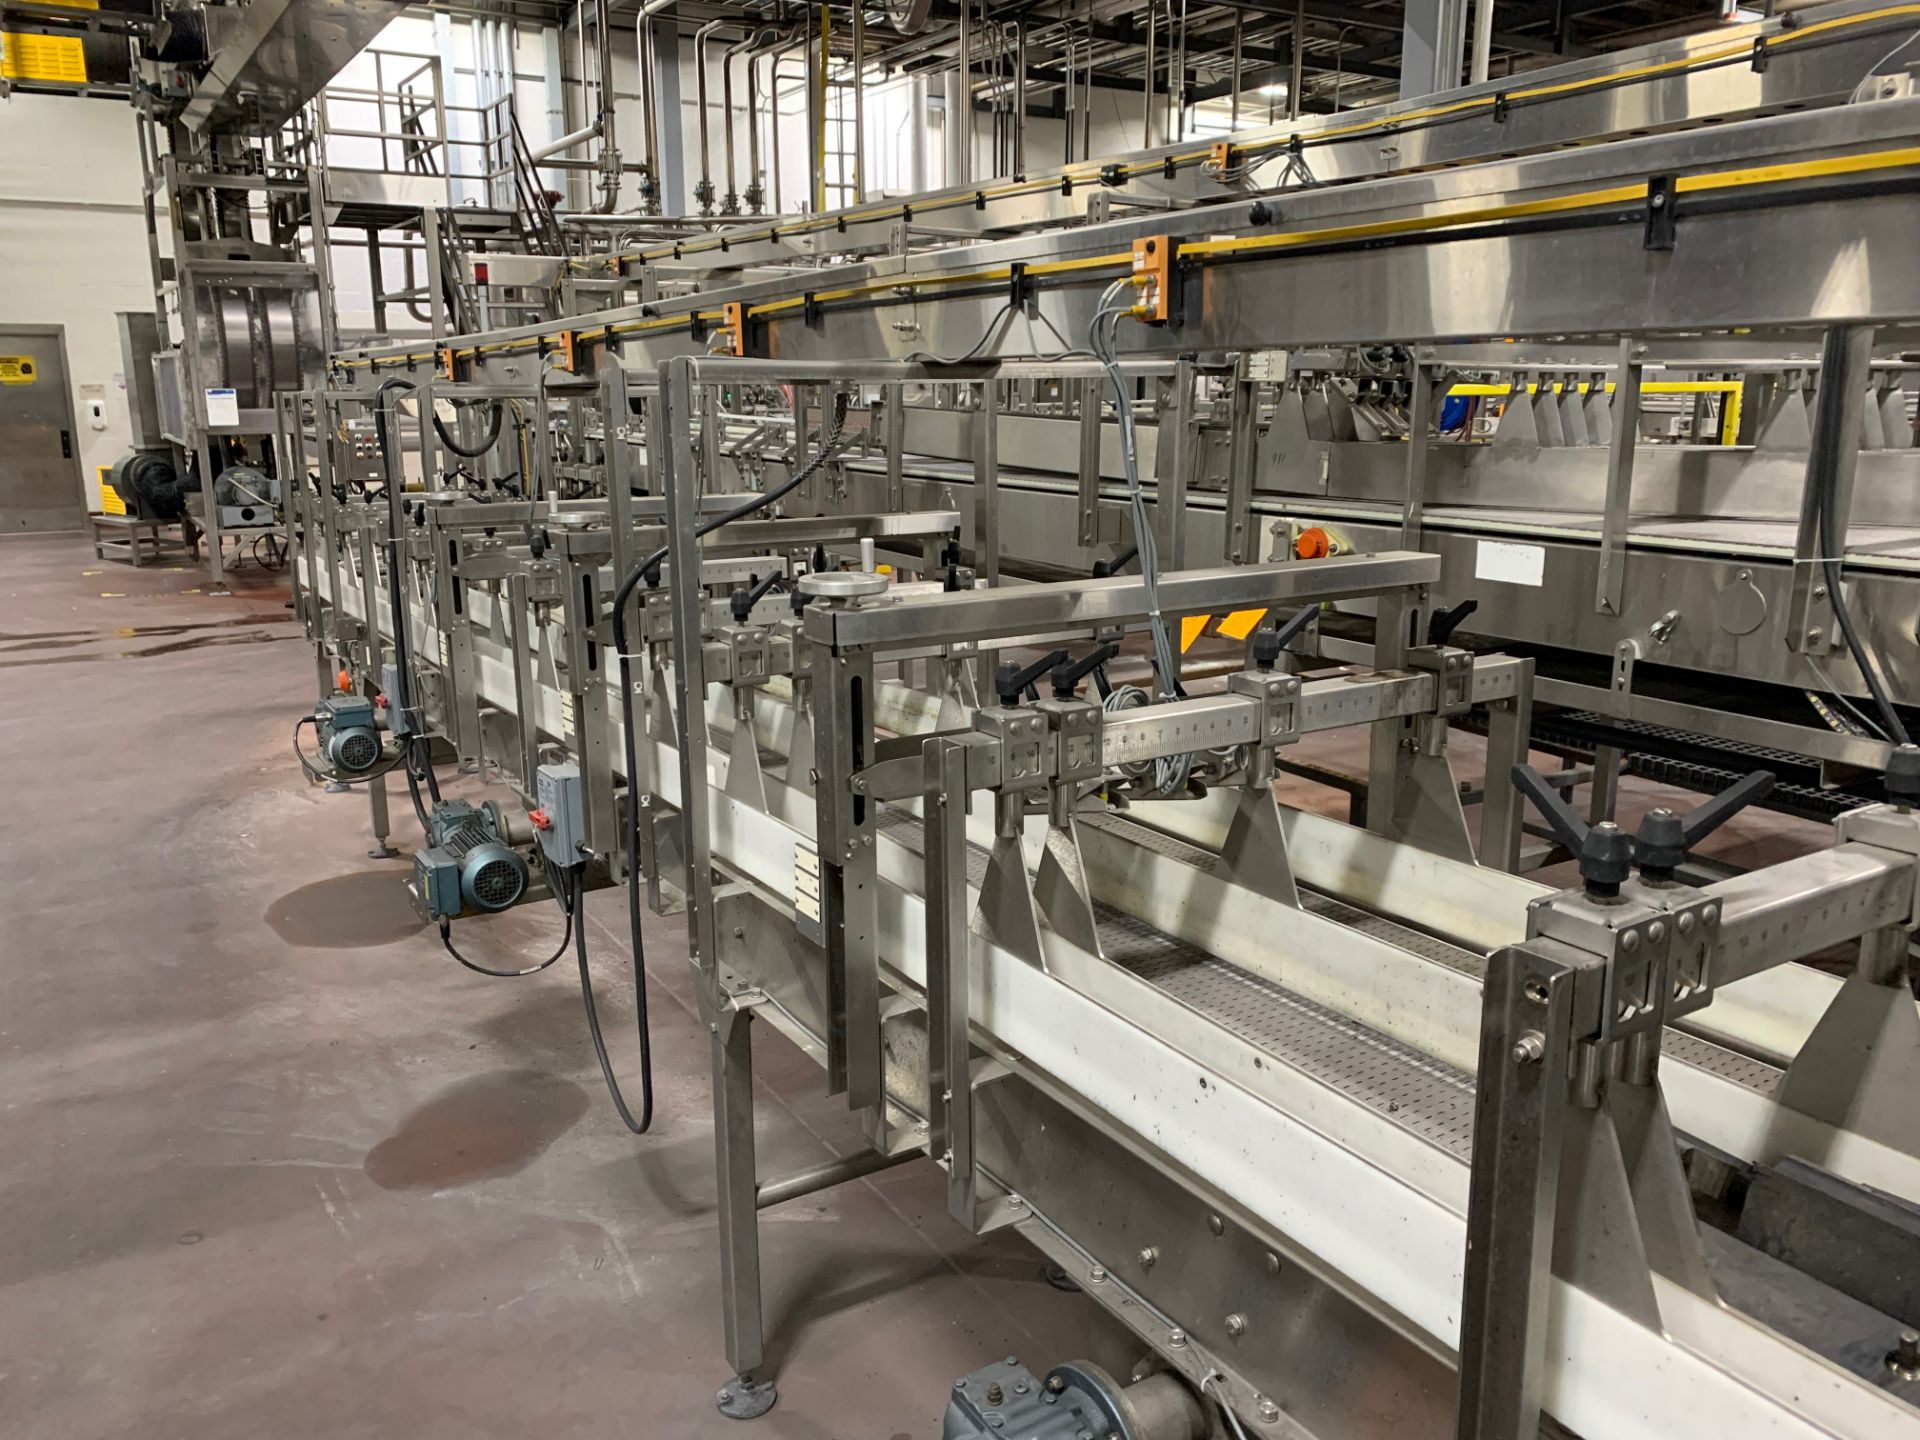 Sentry Carton Conveyor from Divider Switch to Krones Traypacker